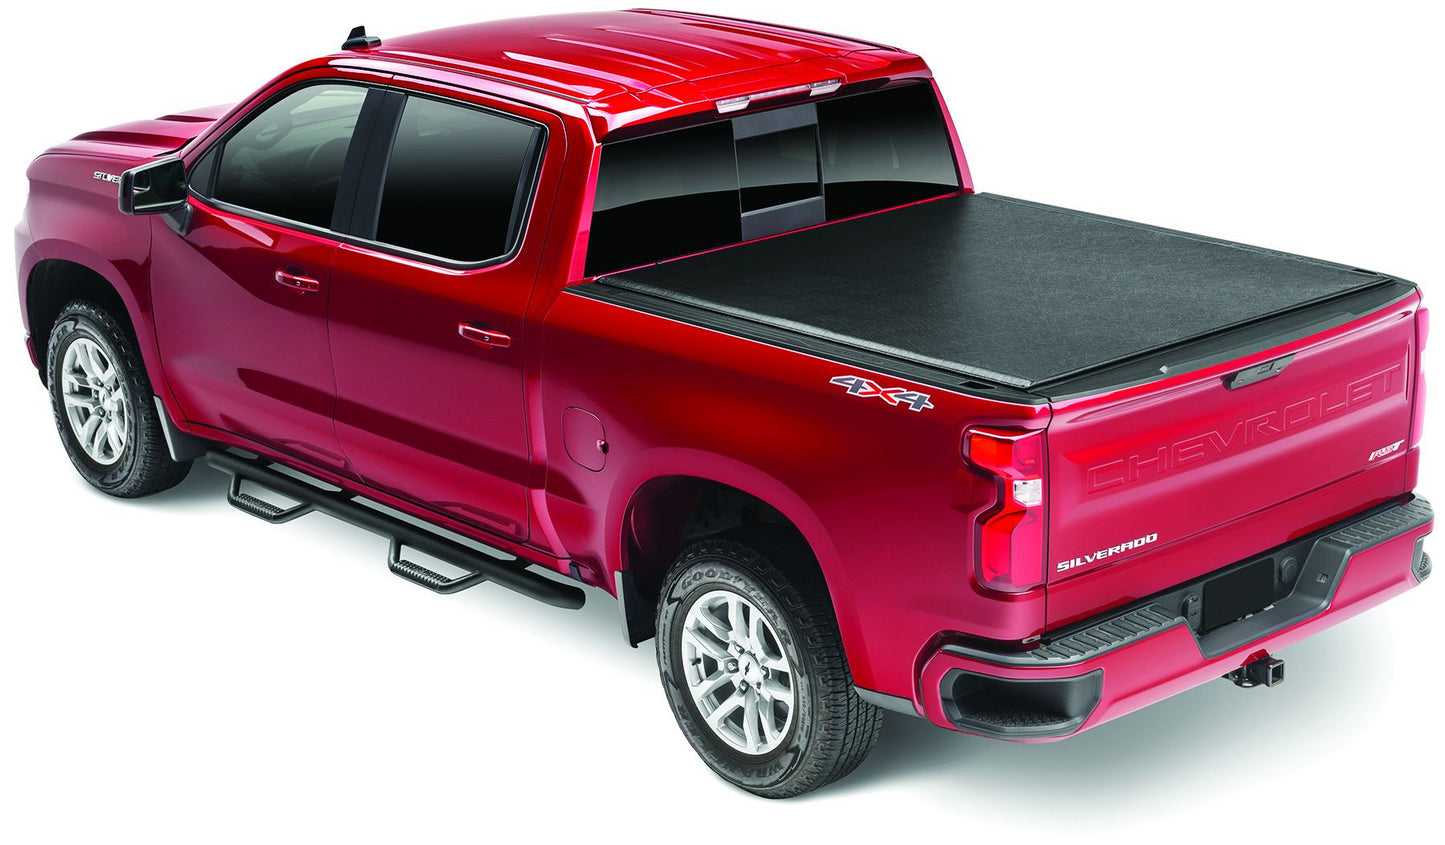 Couvre-Caisse Ford F250/F350/F450 SD 6'6" 17-21